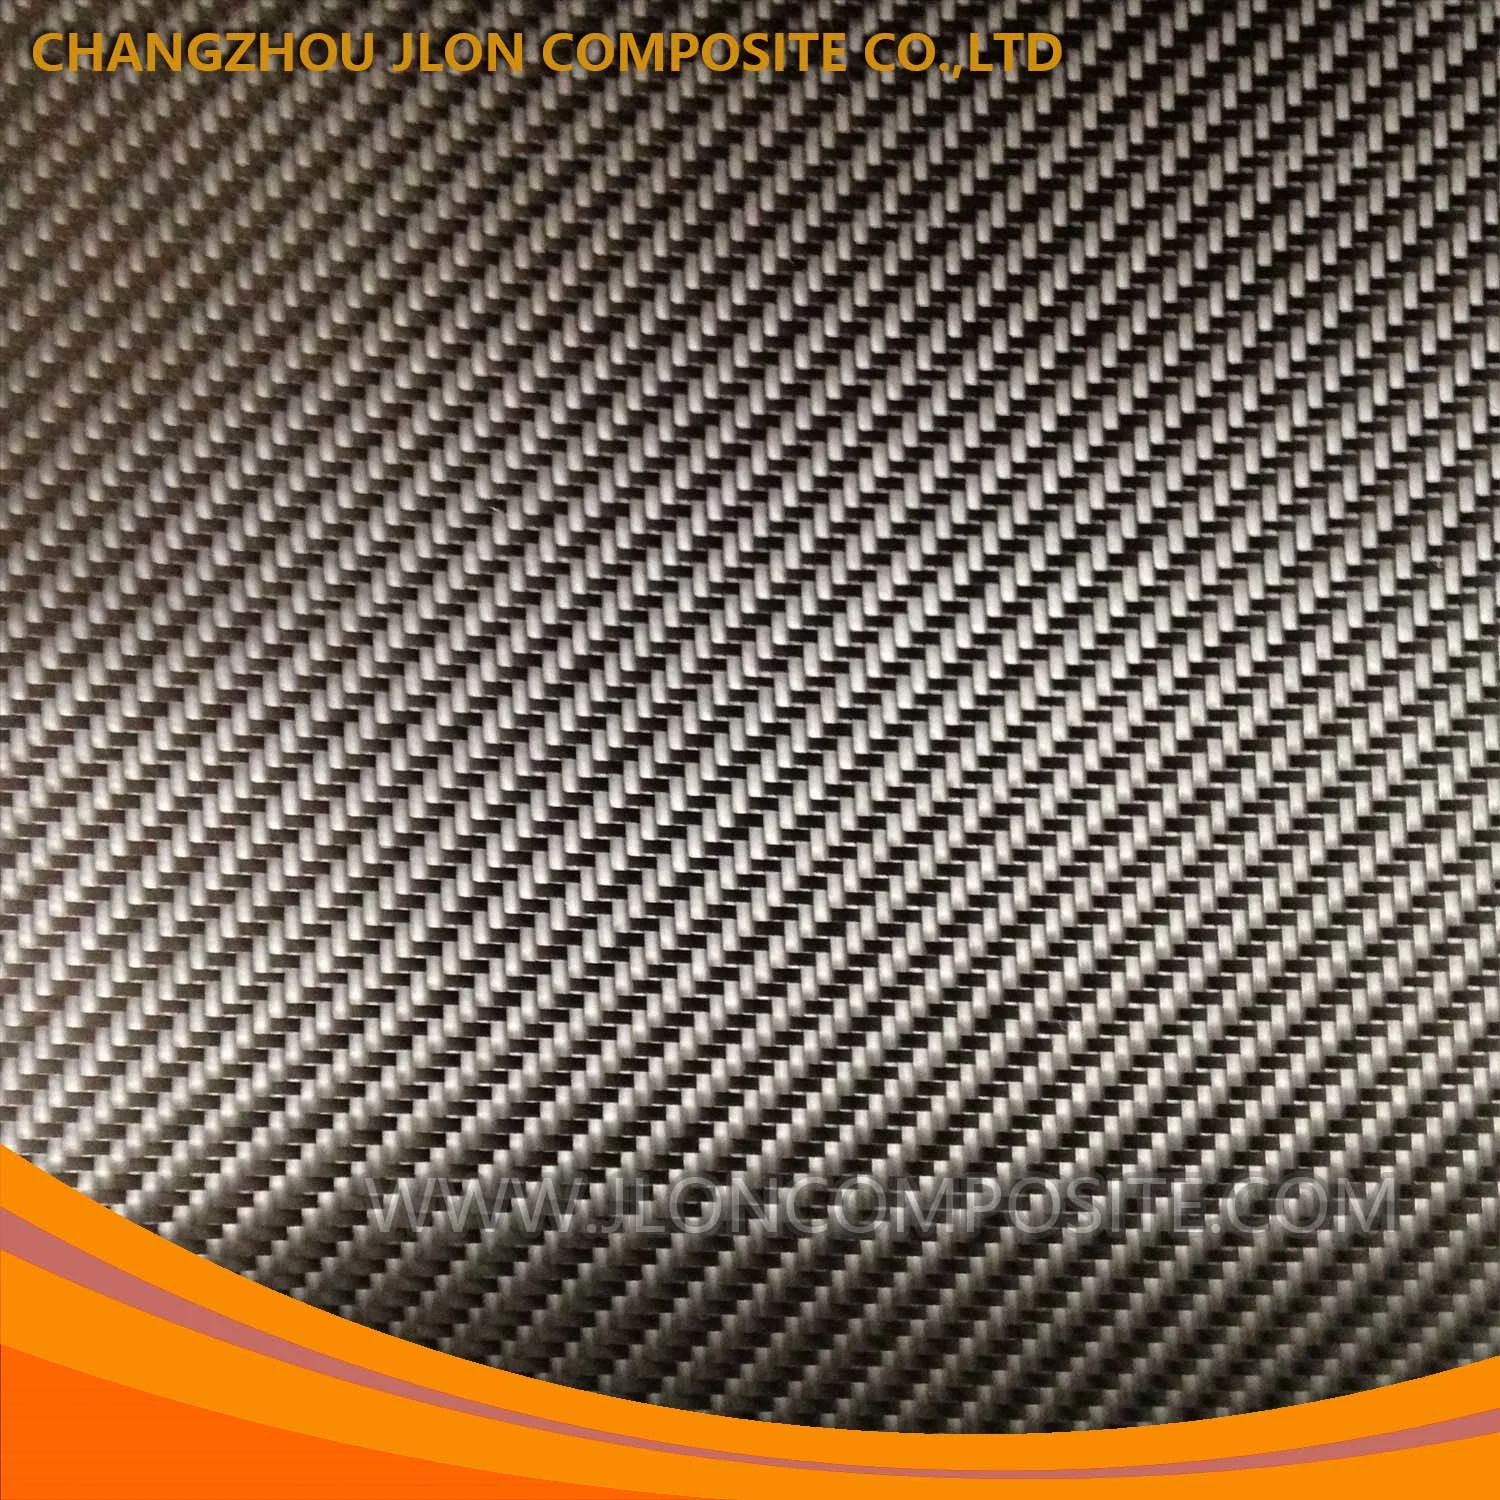 High Strength and High Modulus 1K 120g Twill Weave Carbon Fiber Fabric for Aviation, Automobile, Bicycle, Surfboard, Suite Case, Reinforcement to Helmet